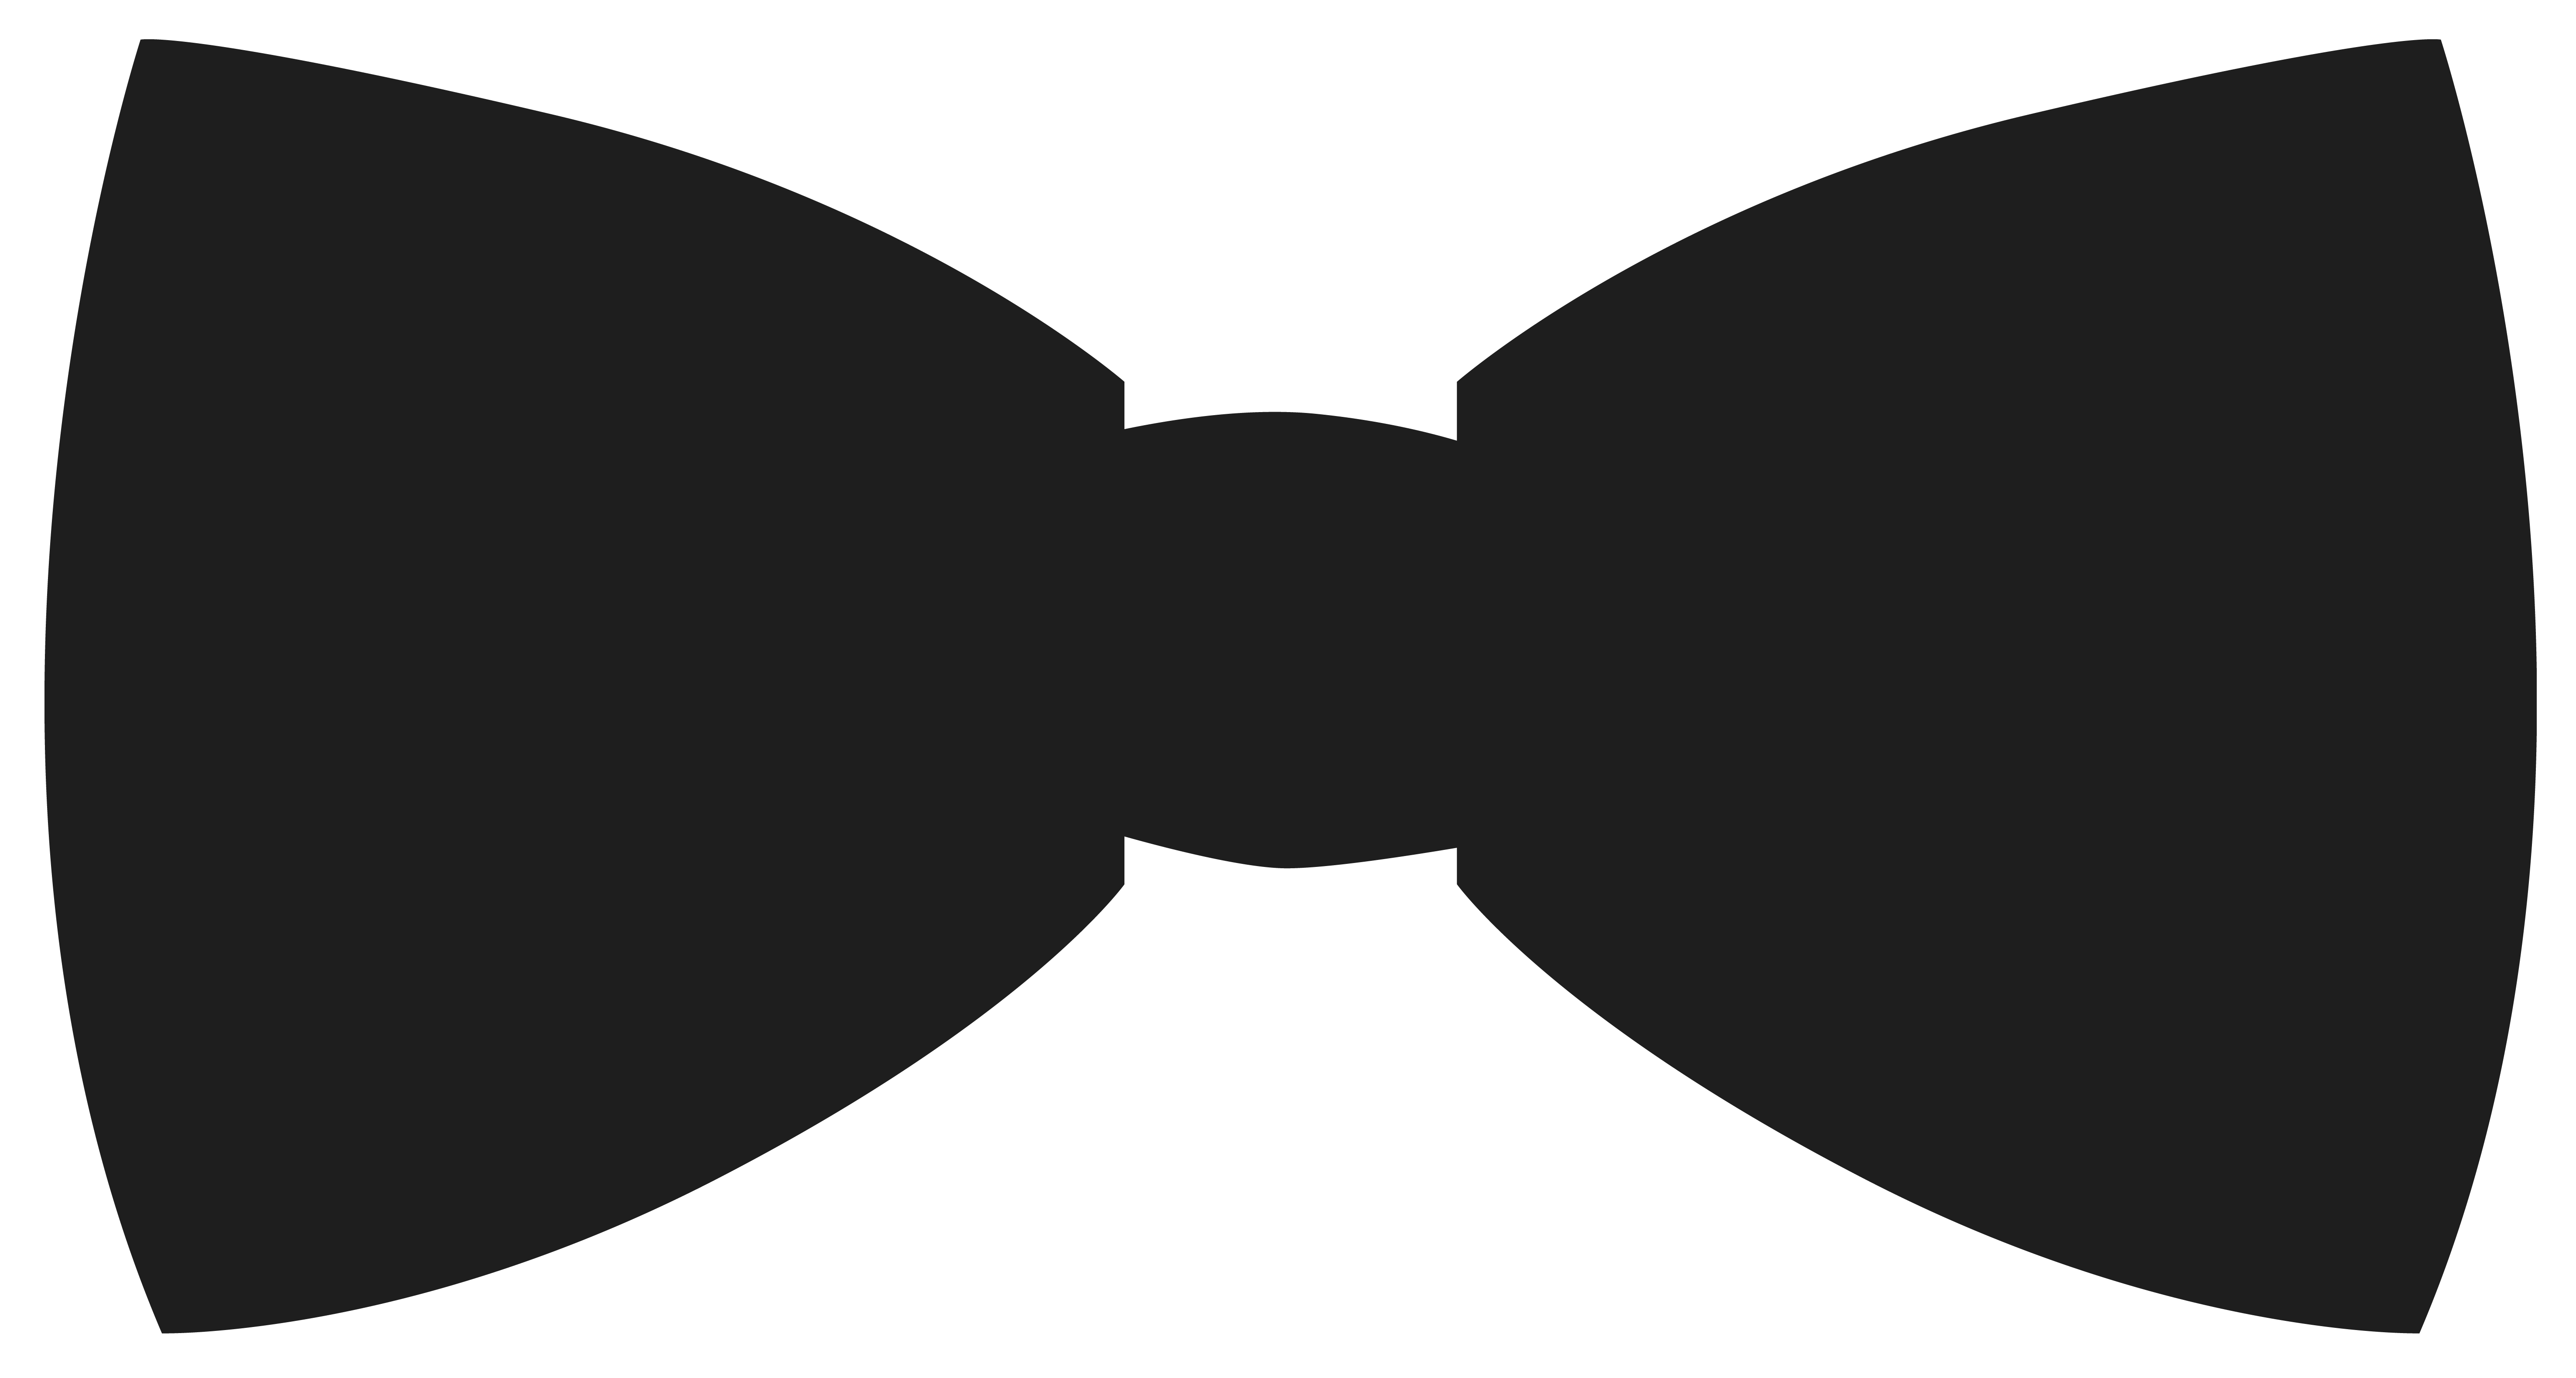 Bow Tie Clipart For Download Free.